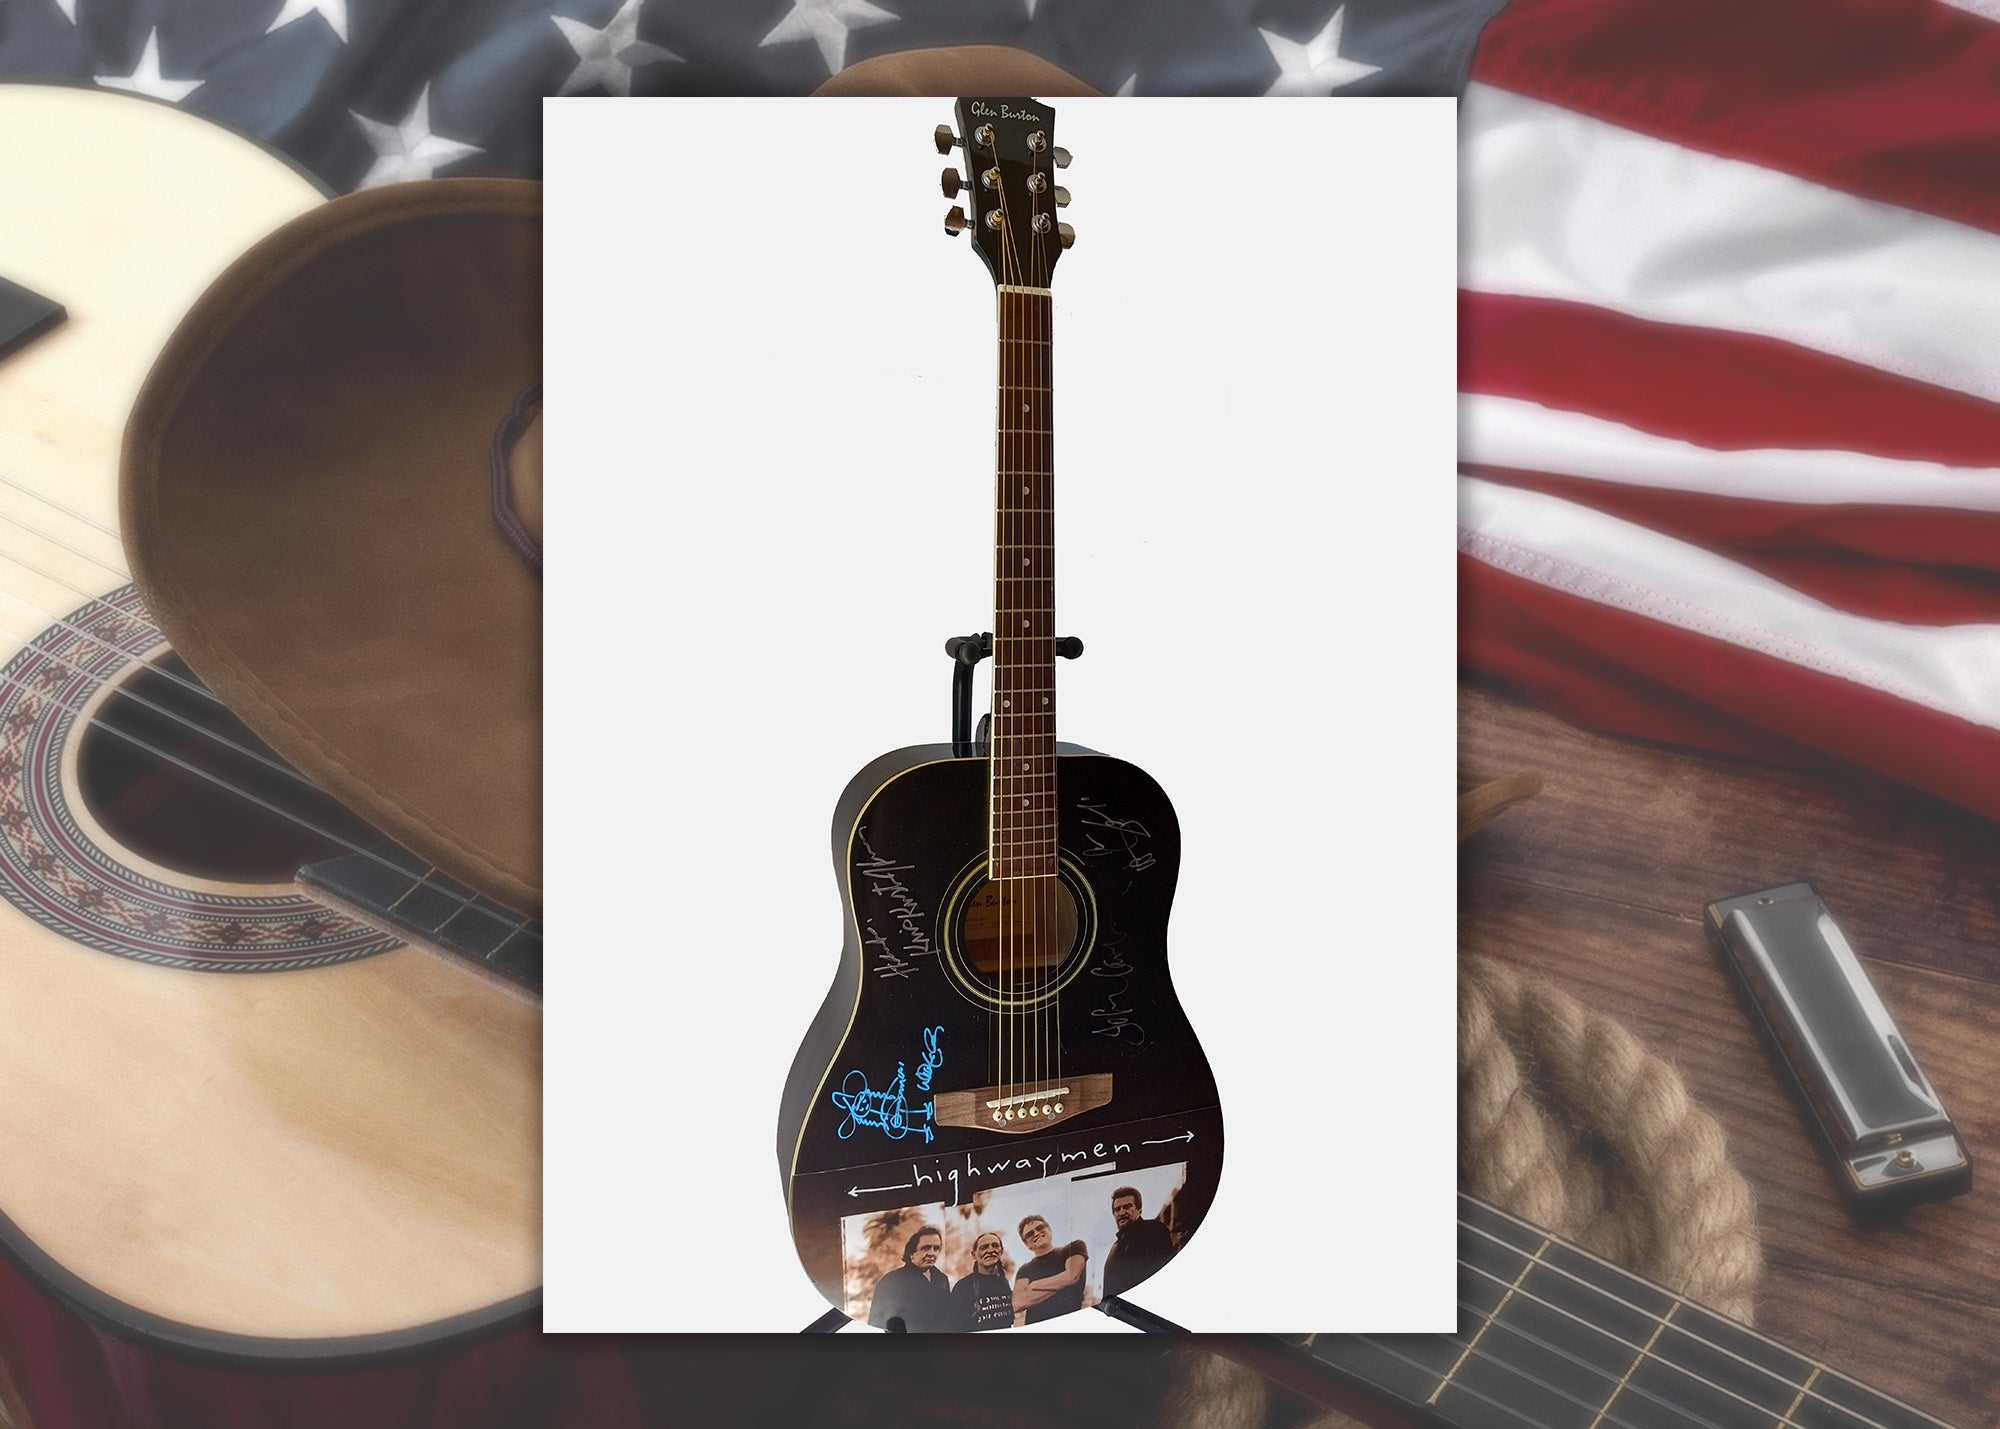 The Highwaymen Johnny Cash, Waylon Jennings, Willie Nelson, Kris Kristofferson signed one of a kind guitar with proof